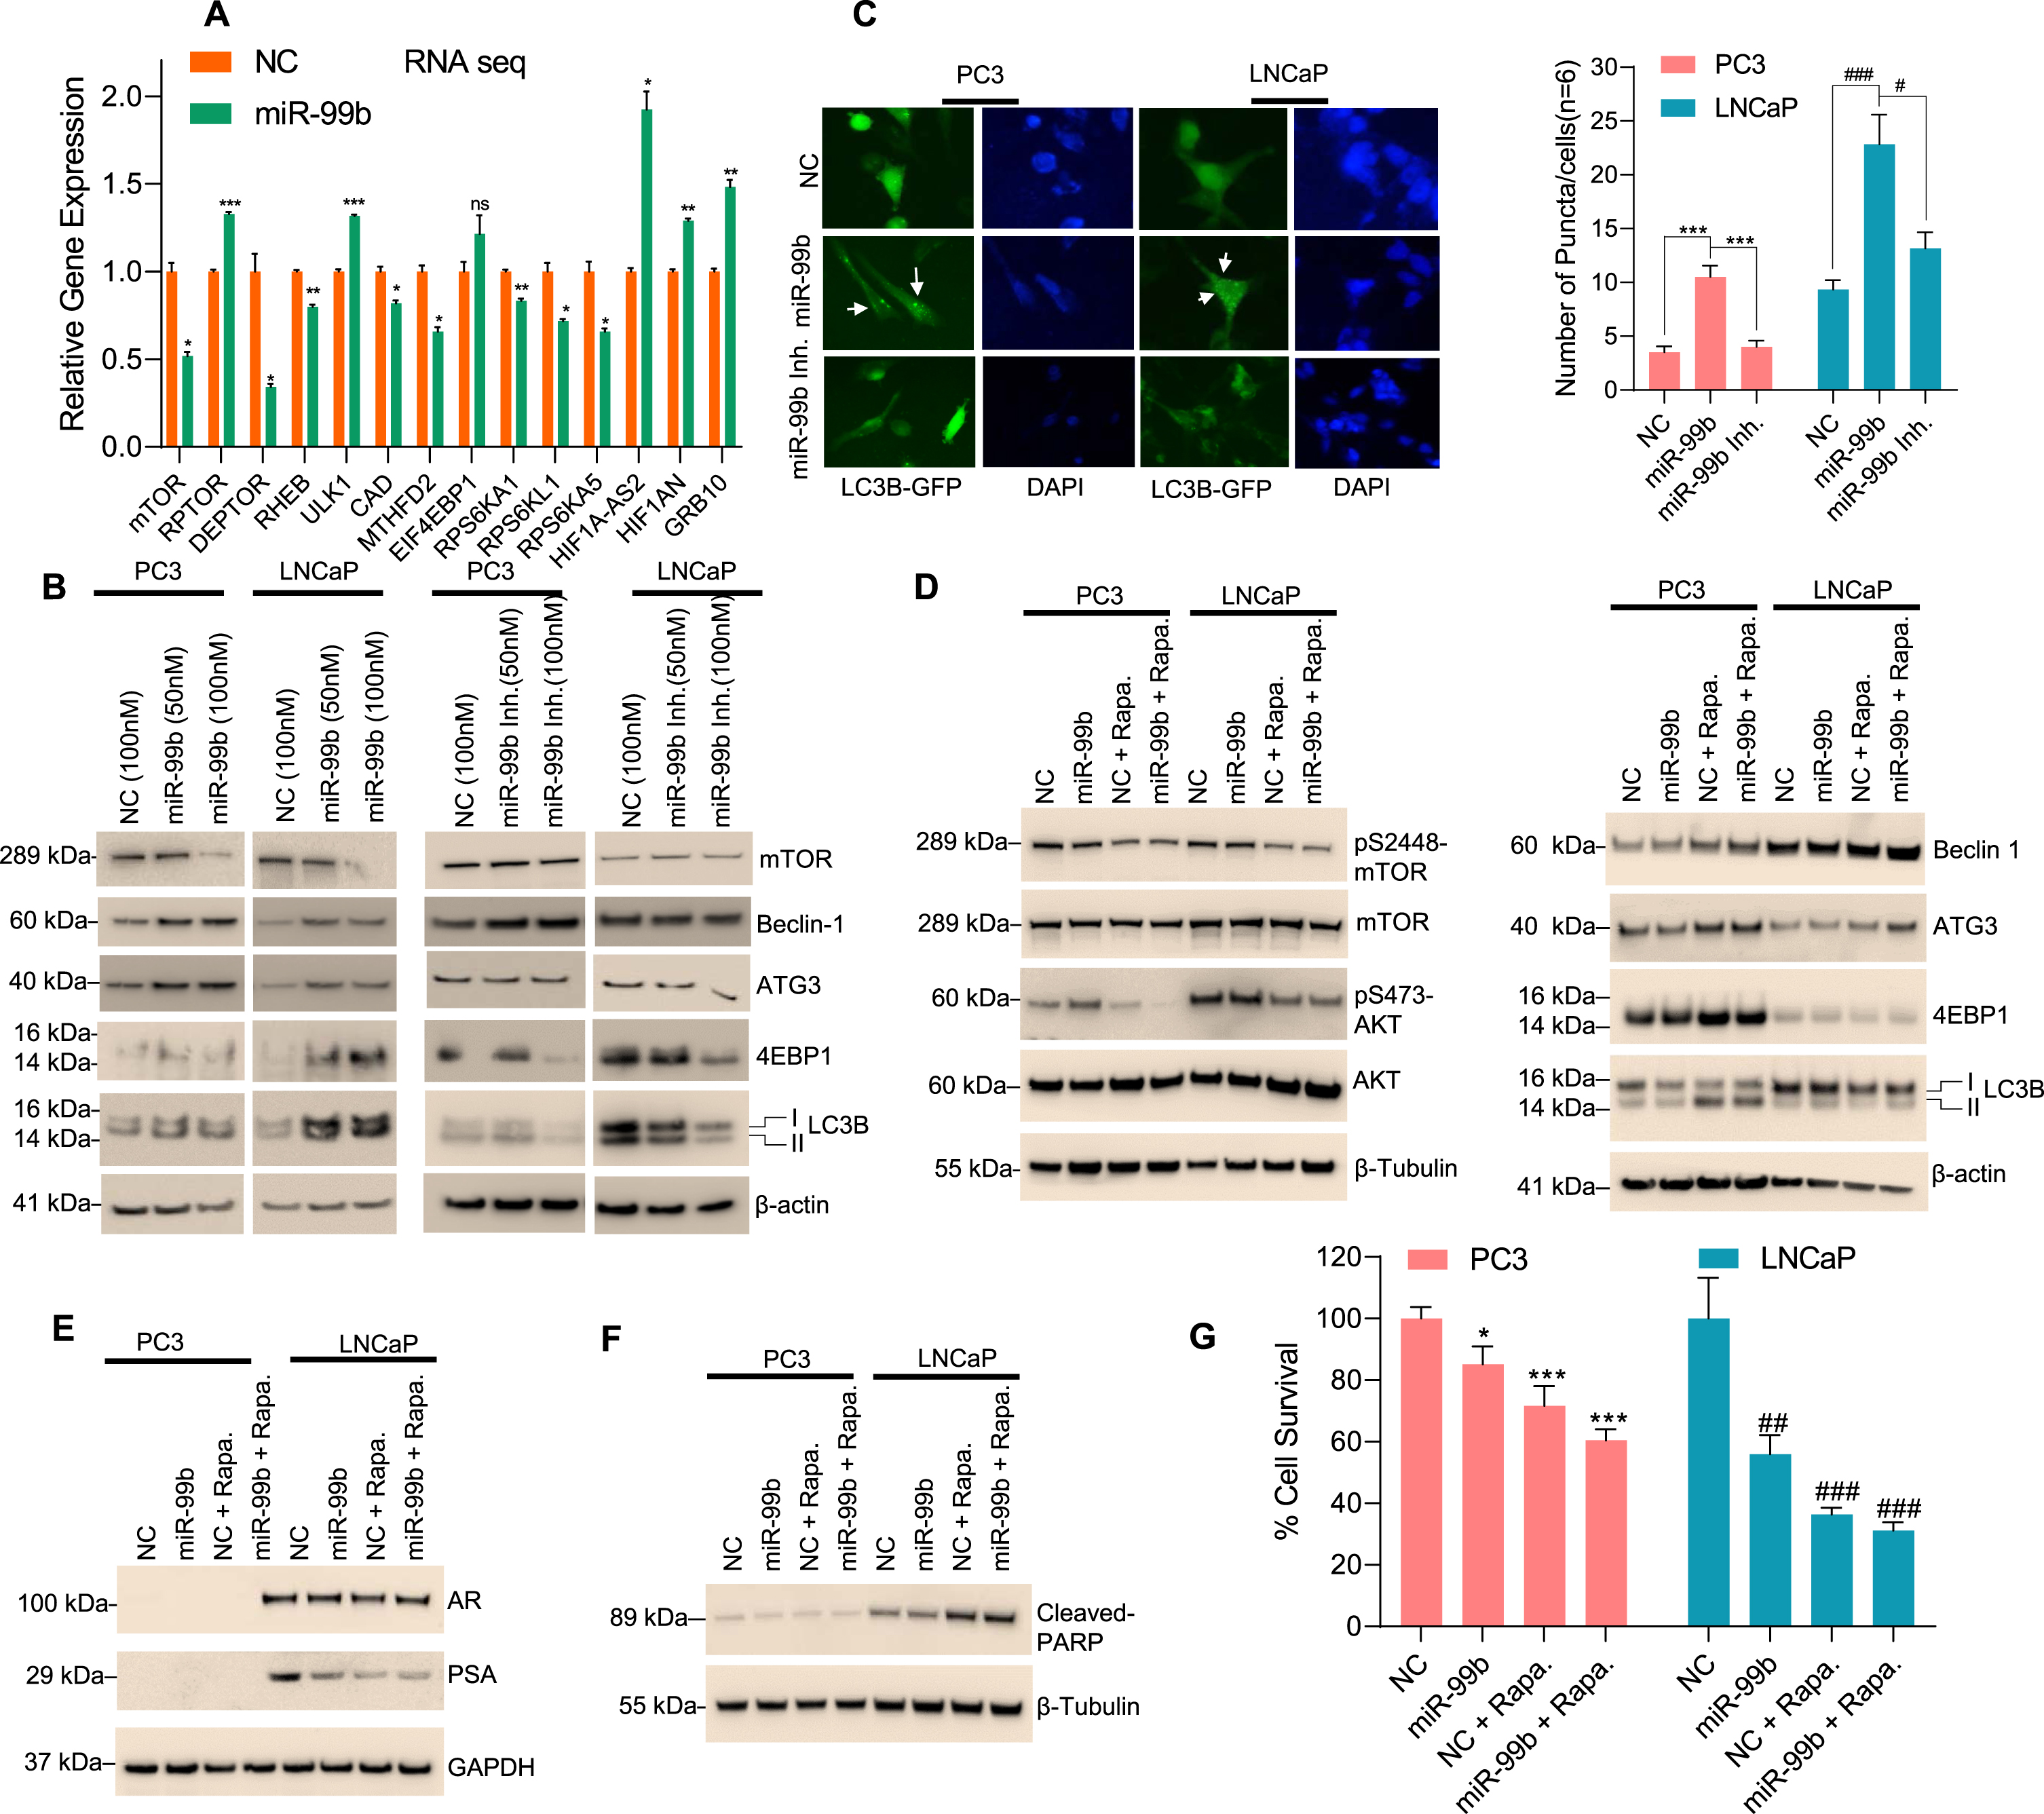 miR-99b targets mTOR and induces cellular autophagy in PCa cells. (A) RNA-Seq analysis: PC3 cells were transfected with NC mimic or miR-99b mimic for 30 h and the effect of miR-99b on differential global gene expression was analyzed as described in the materials and methods section. Effect of overexpression of miR-99b on the relative expression of mTOR complex 1 (mTORC1) and mTOR complex 2 (mTORC2) and autophagy-related gene expression was presented. *P < 0.05, ** P < 0.01, ***P < 0.001 compared with NC-transfected cells. (B) Effect of miR-99b and miR-99b inhibitor on mTOR and autophagy-related markers (Beclin1, ATG3, 4EBP1, and LC3B) expression was analyzed by western blotting. (C) Effect of miR-99b and miR-99b inhibitor on LC3B mediated puncta formation in PC3 and LNCaP cells were analyzed by immunofluorescence (left panel) and the number of LC3B mediated puncta formation was quantified and plotted (right panel). *** P < 0.001 compared with NC or miR-99b inhibitor transfected PC3 cells. #P < 0.01, ###P < 0.001 compared with NC or miR-99b inhibitor transfected LNCaP cells. (D, E & F) Effects of rapamycin and miR-99b on AKT/mTOR signaling and autophagy-related marker expression, AR signaling, and apoptotic markers were analyzed by immunoblotting. (G) Effects of rapamycin, miR-99b, and rapamycin plus miR-99b on PCa cell survival were analyzed by MTT assay. *P < 0.05, ** P < 0.01, ***P < 0.001 compared with NC-transfected PC3 cells. ##P < 0.01, ###P < 0.001 compared with NC-transfected LNCaP cells.